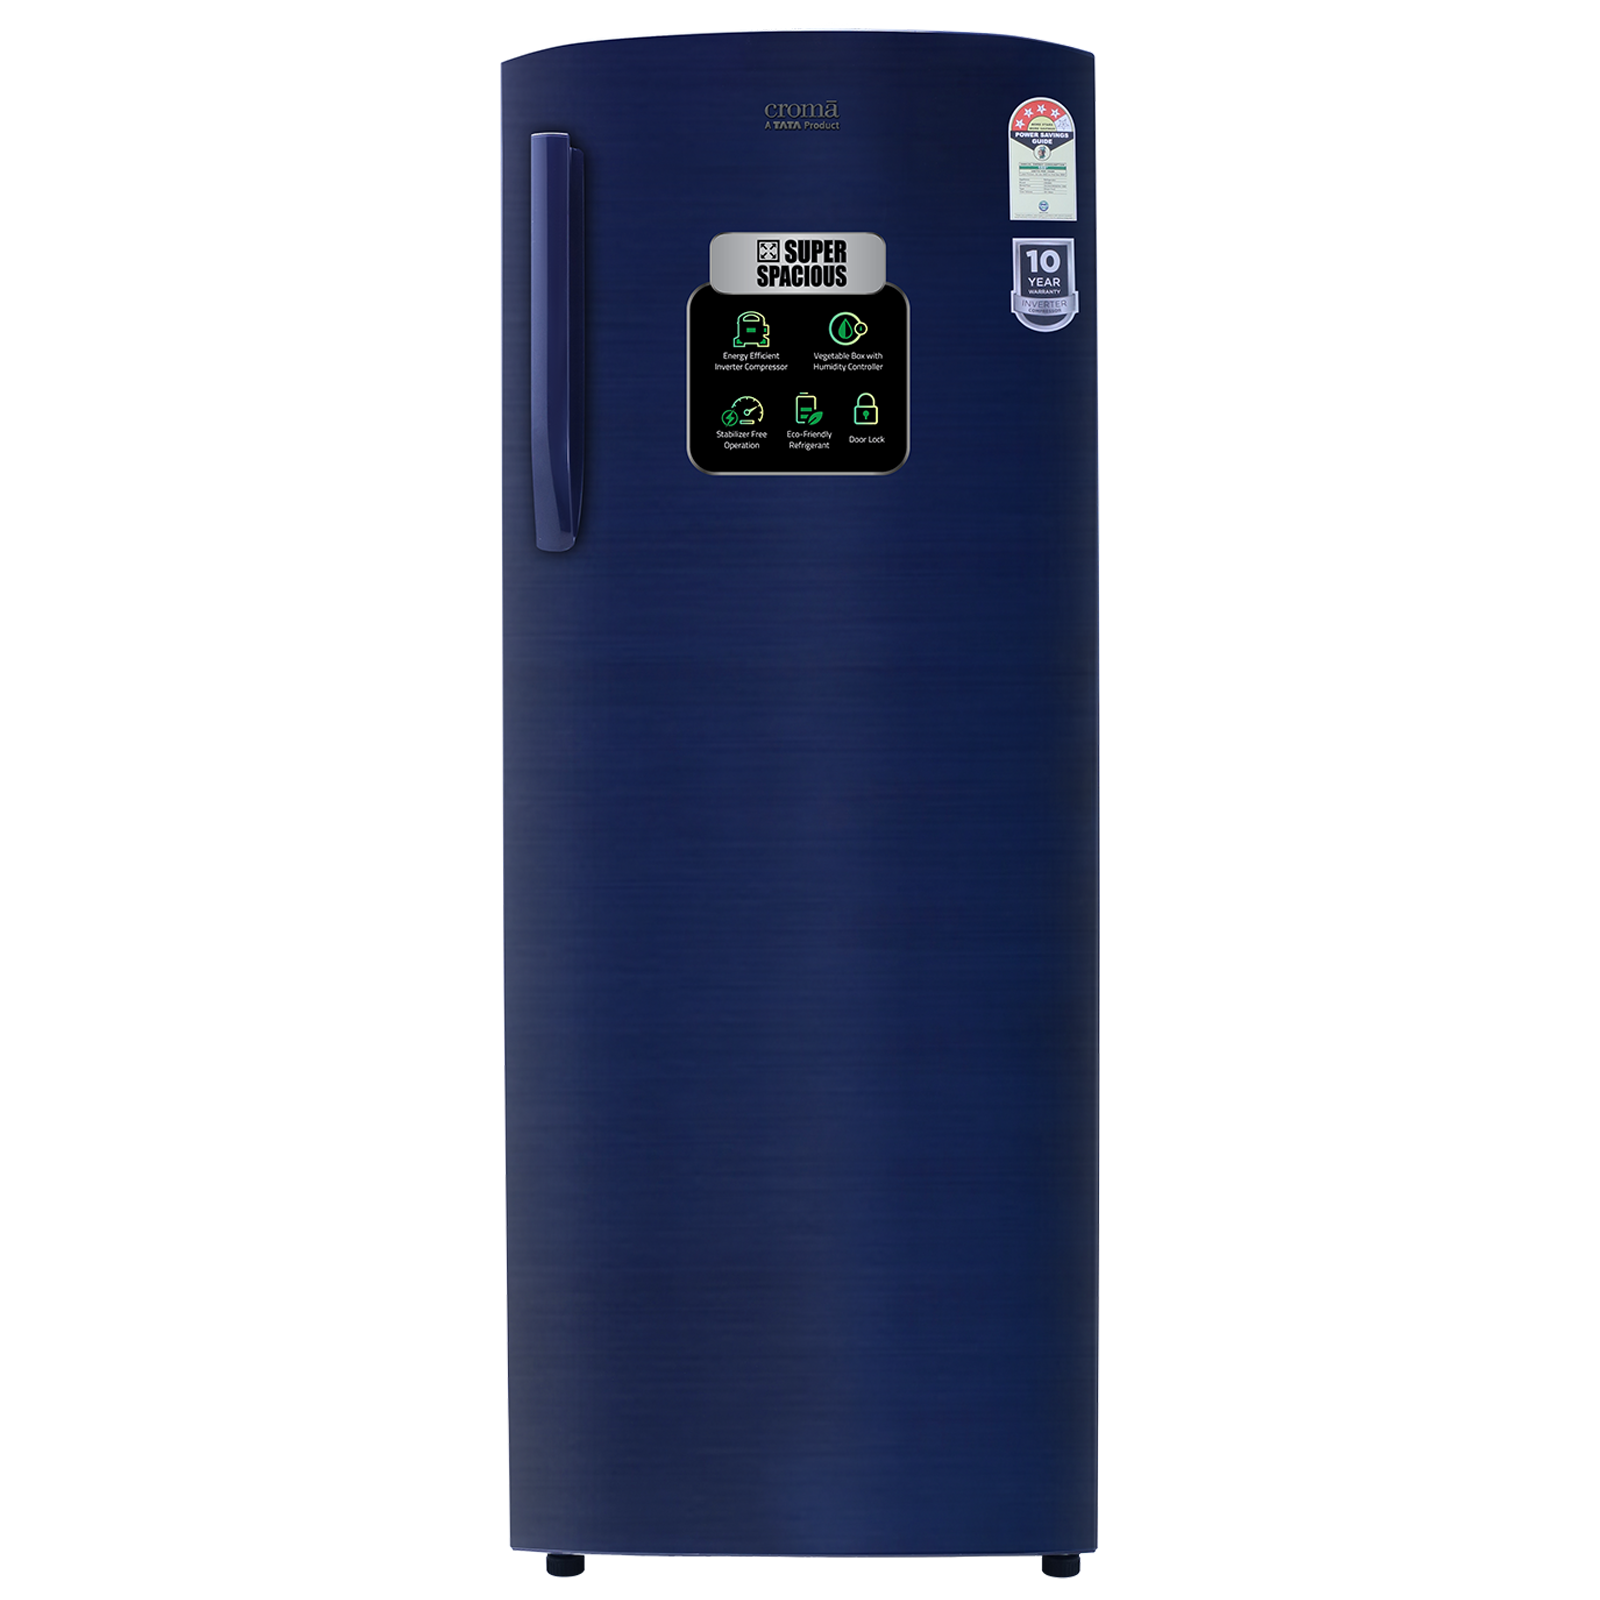 Croma 251 Litres 4 Star Direct Cool Single Door Refrigerator with Anti Fungal Gasket (CRLR251DIE302704, Blue)